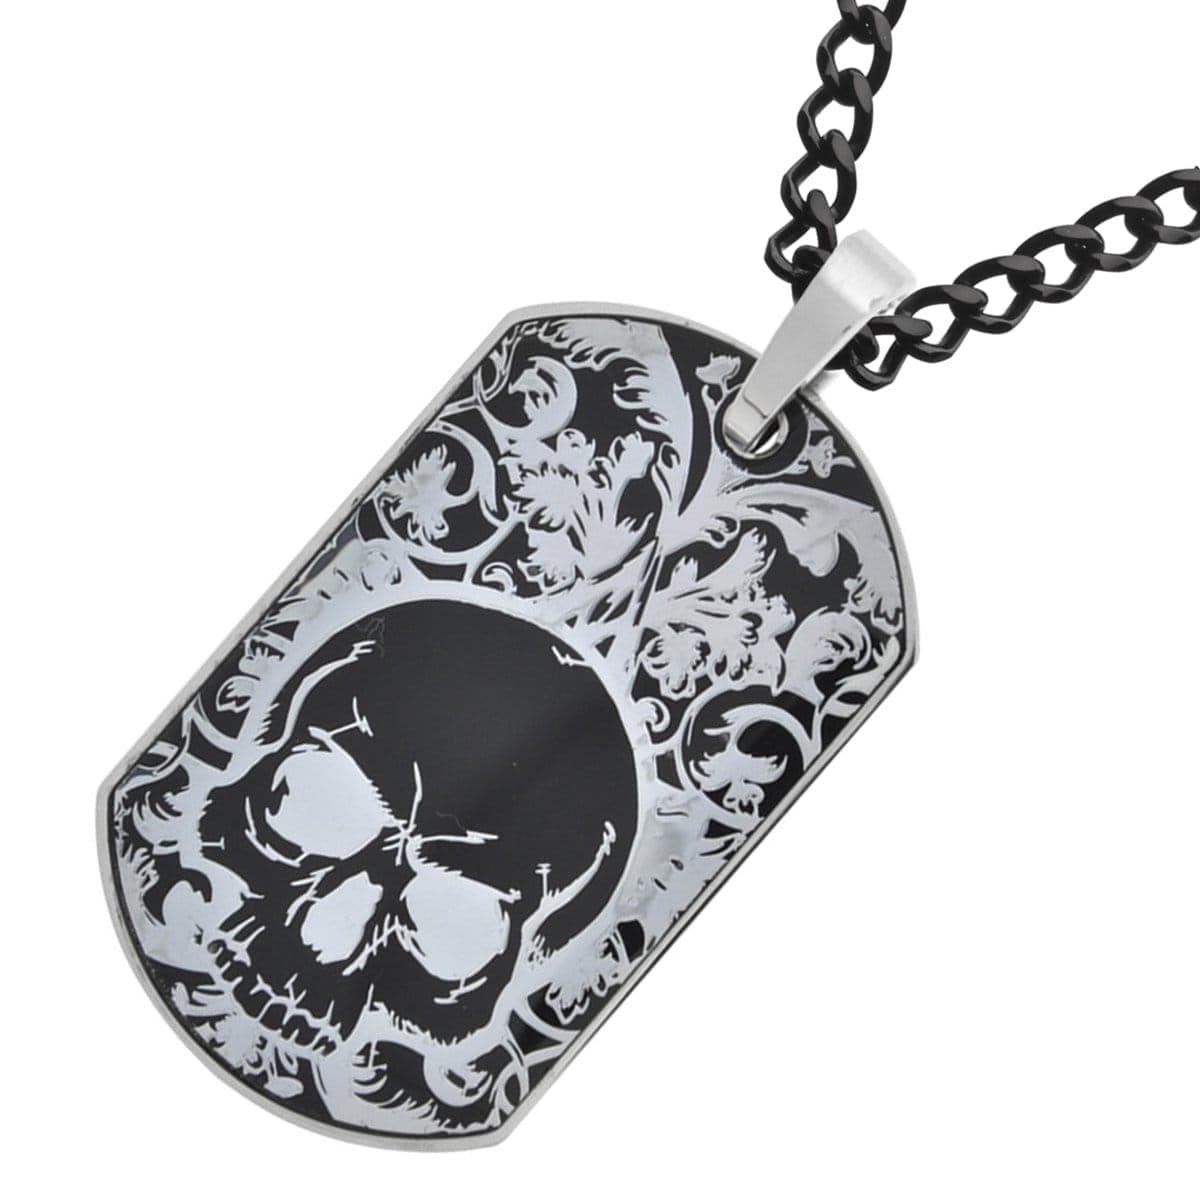 INOX JEWELRY Pendants Black and Silver Tone Stainless Steel Skull Tag Pendant SSP7078